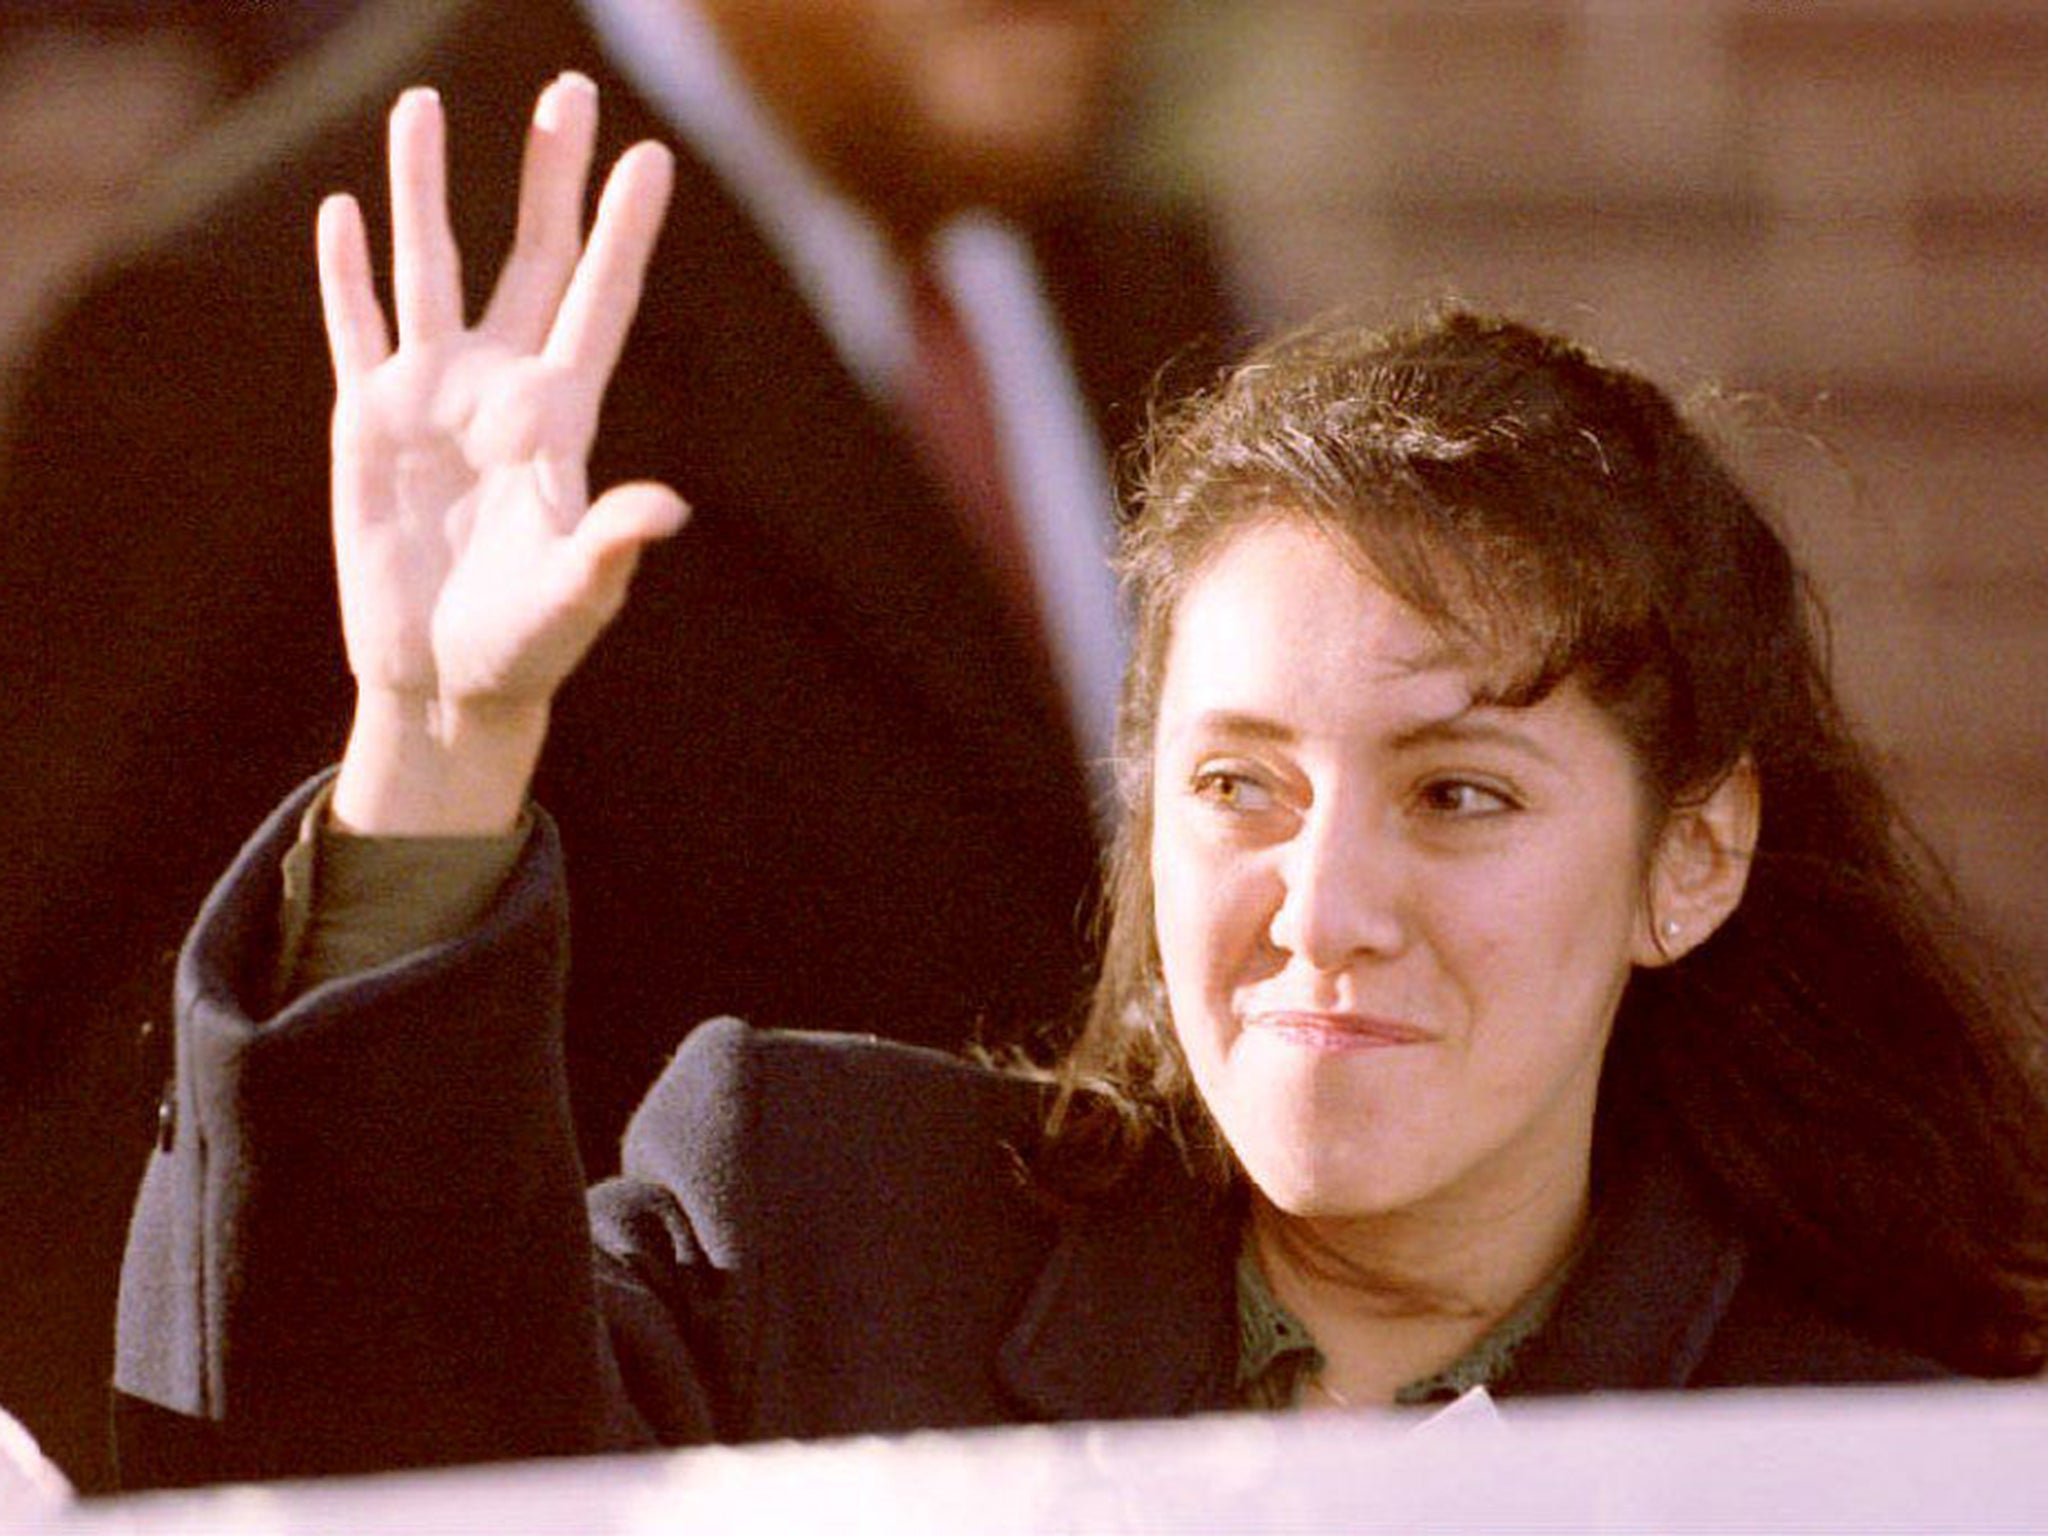 Lorena leaves the courthouse in Manassas, Virginia, in January 1994, having been found not guilty of malicious wounding